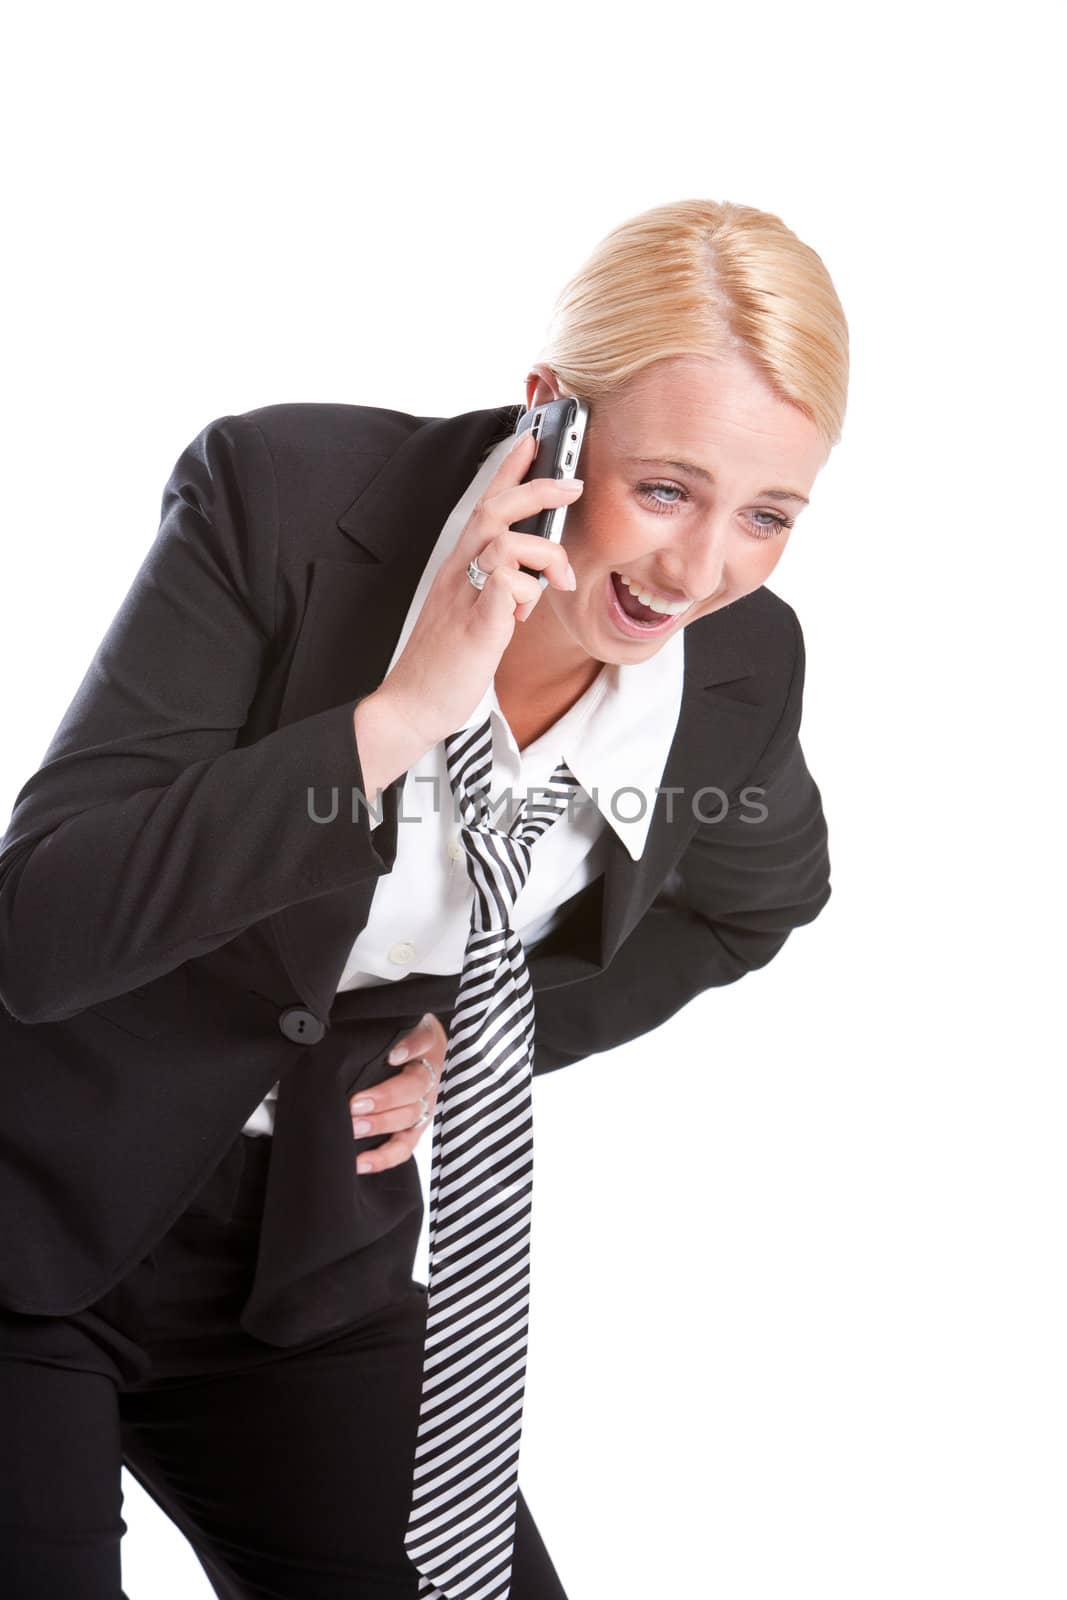 Business woman on the phone laughing out loud